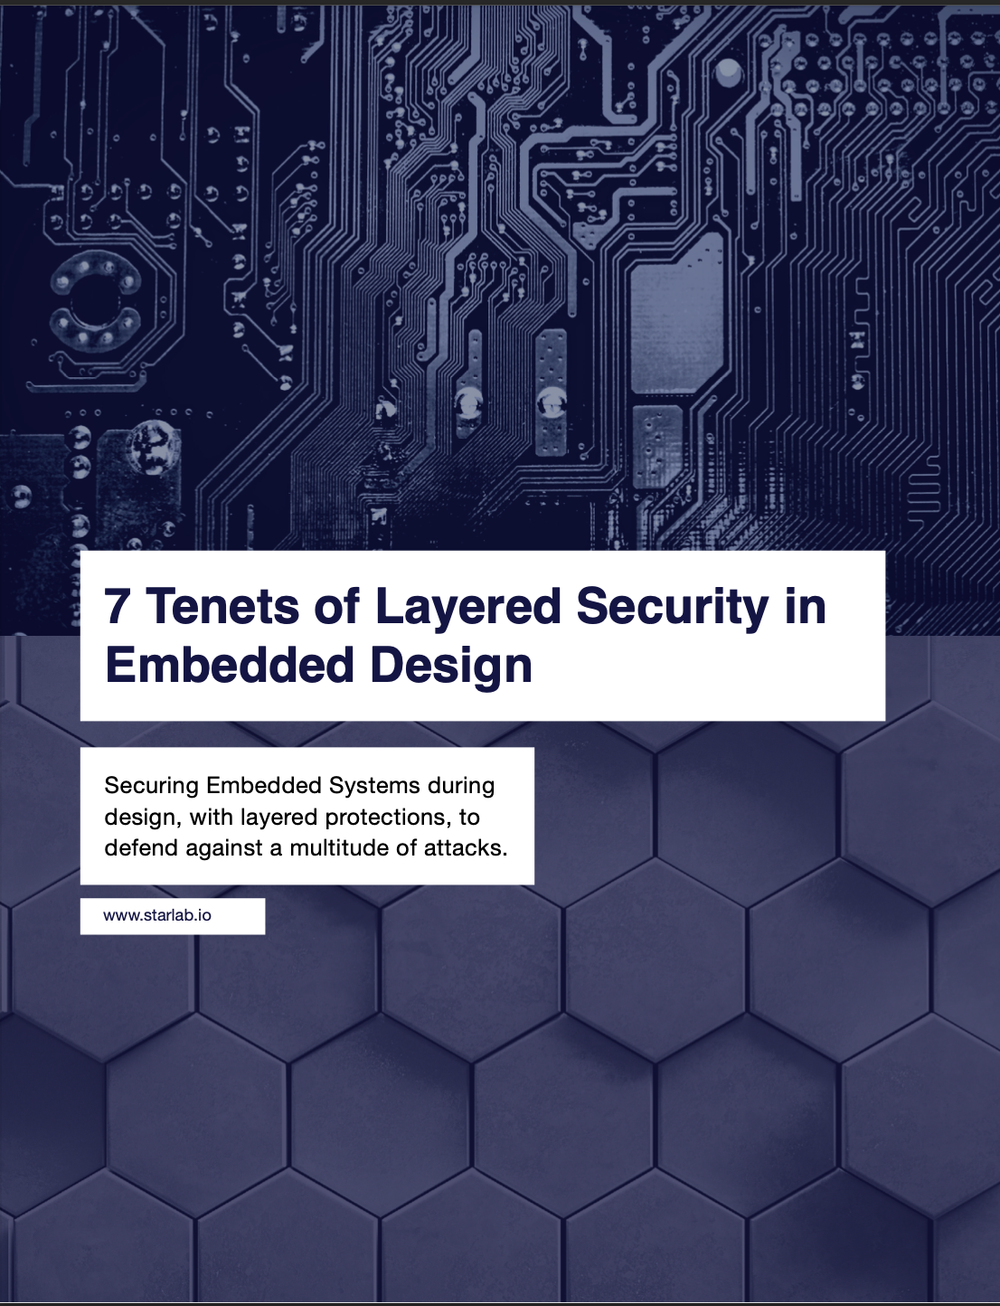 7 Tenets of Layered Security in Embedded Design